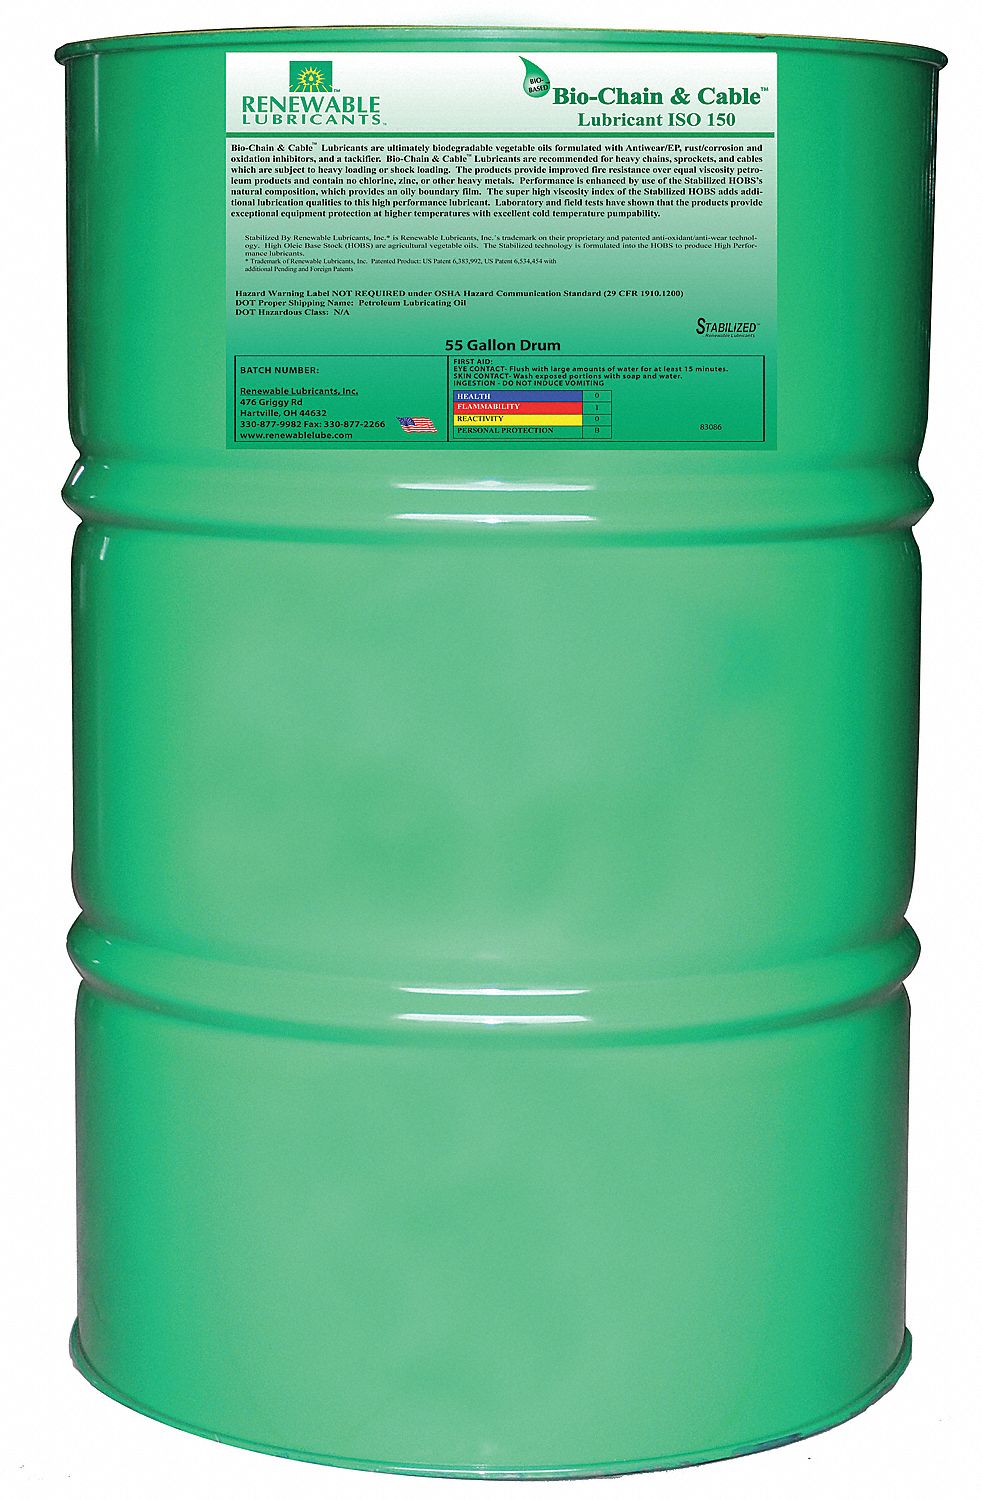 21A537 - Biodegradable Lubricant 55 Gal